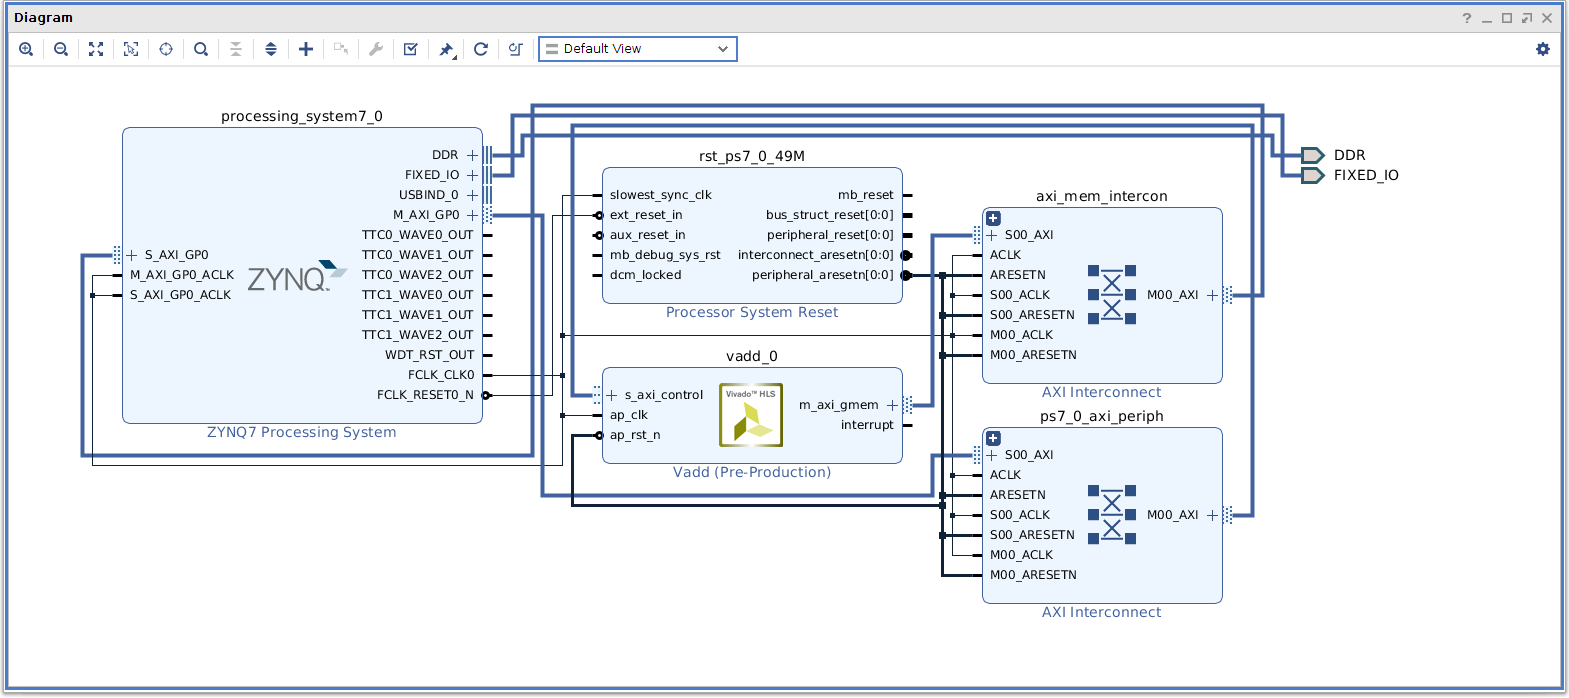 Block diagram view after configuration of the processing system.